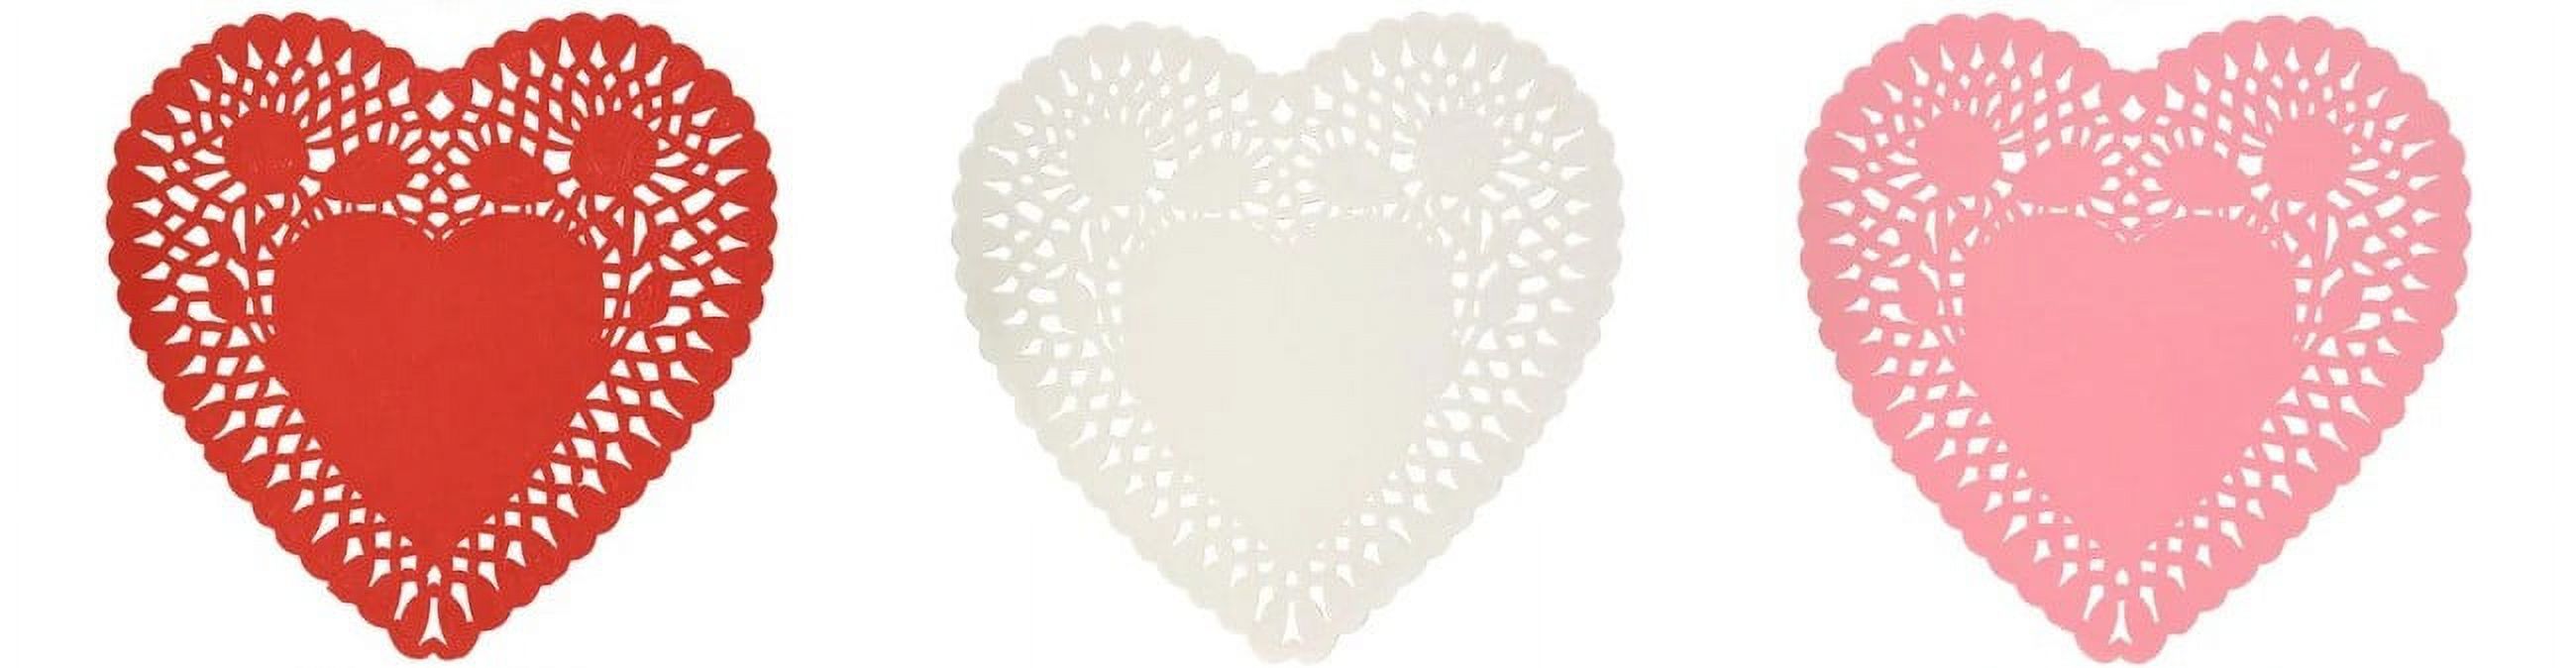 CGT Valentine's Day Heart Shaped Paper Doilies Red Pink White Lace Liner Serving Trays Food Party Bridal Shower Wedding Birthday Home Activities Craft